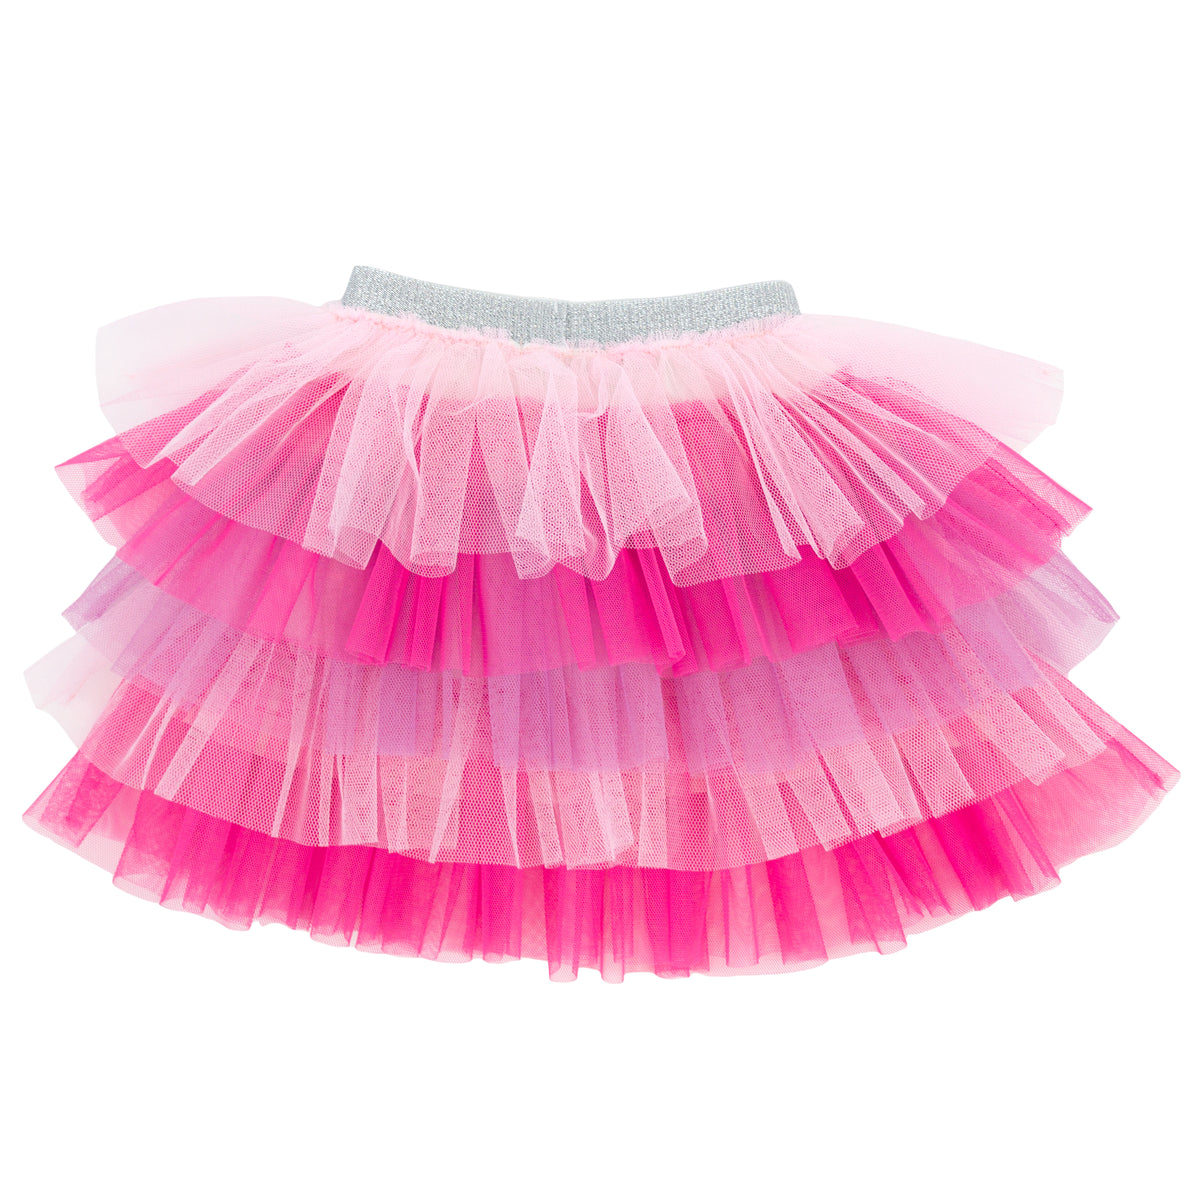 oh baby! Ombre Layered Skirt - Cotton Candy